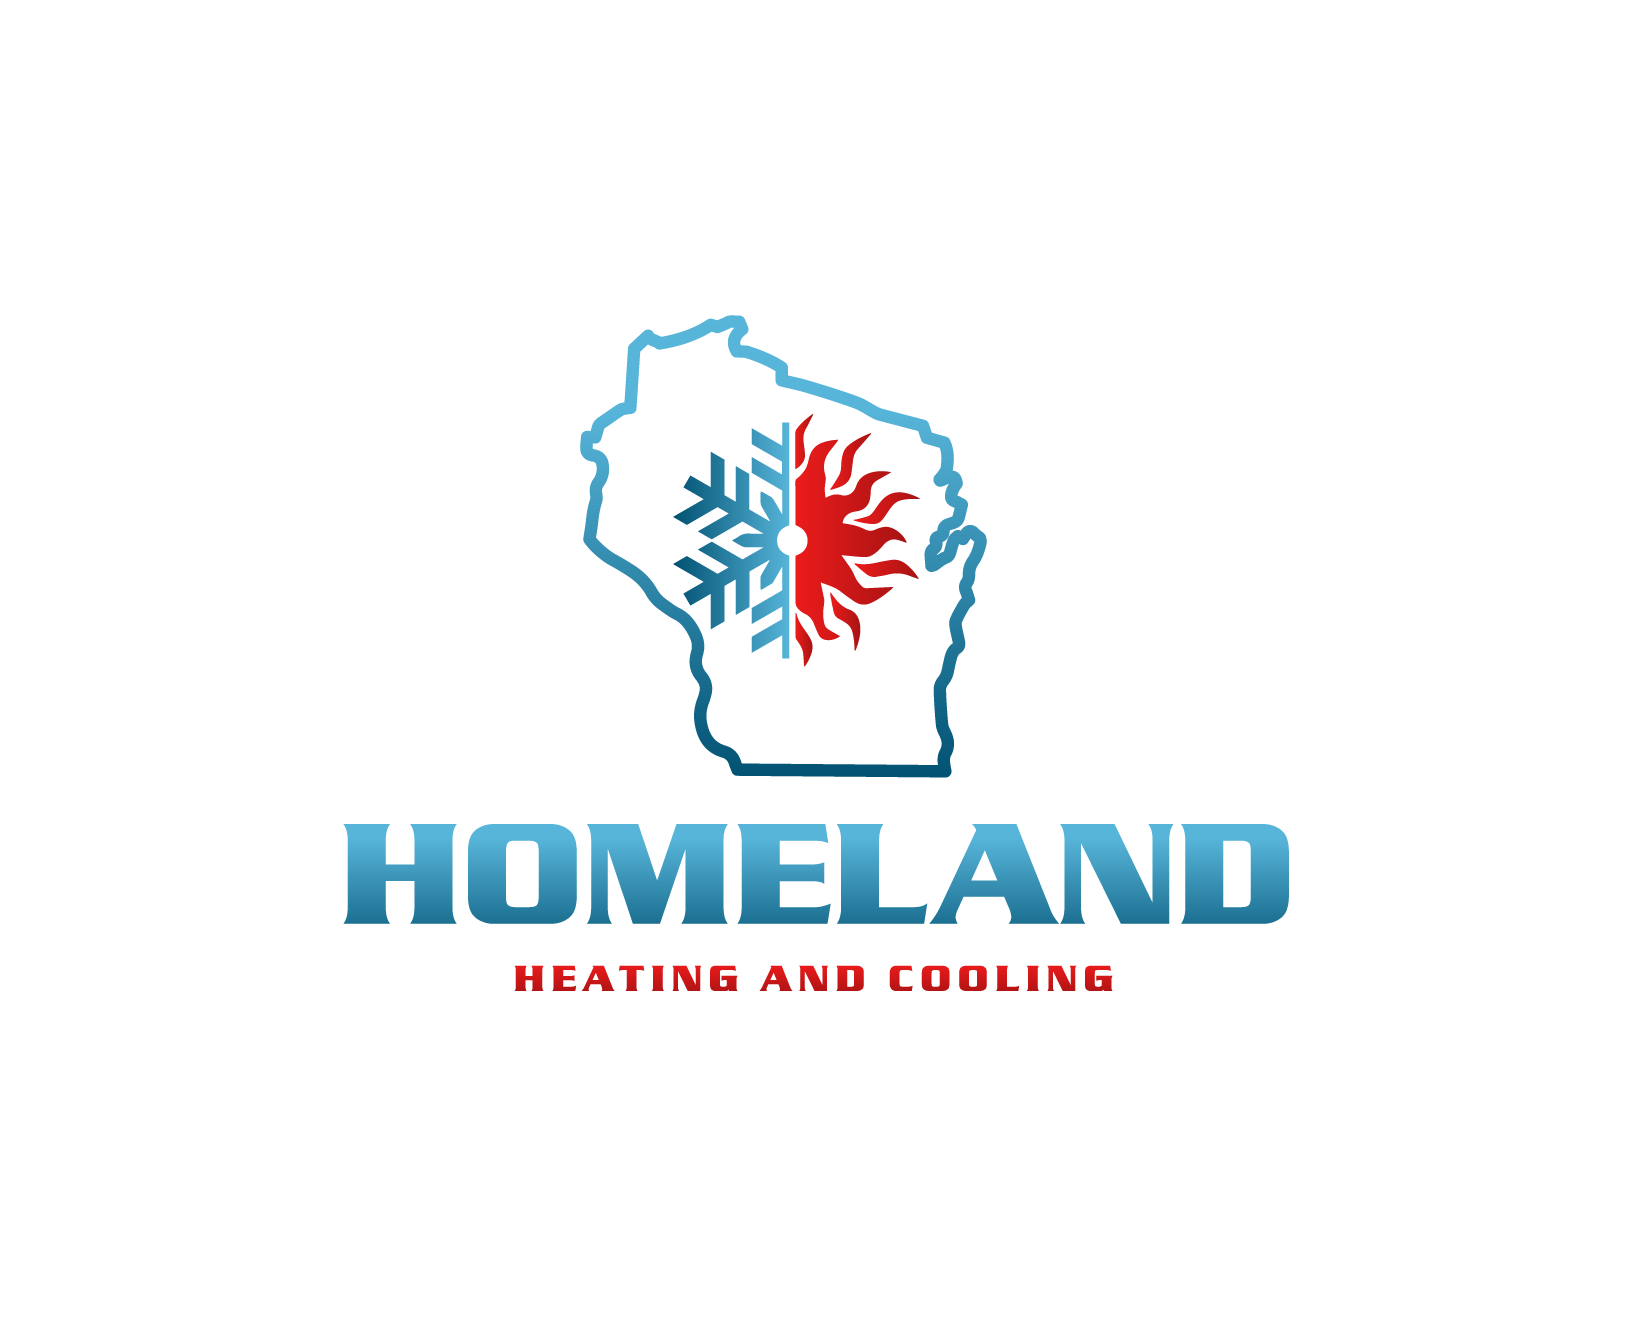 Homeland Heating and Cooling LLC N 9666 Corning Rd, Portage Wisconsin 53901